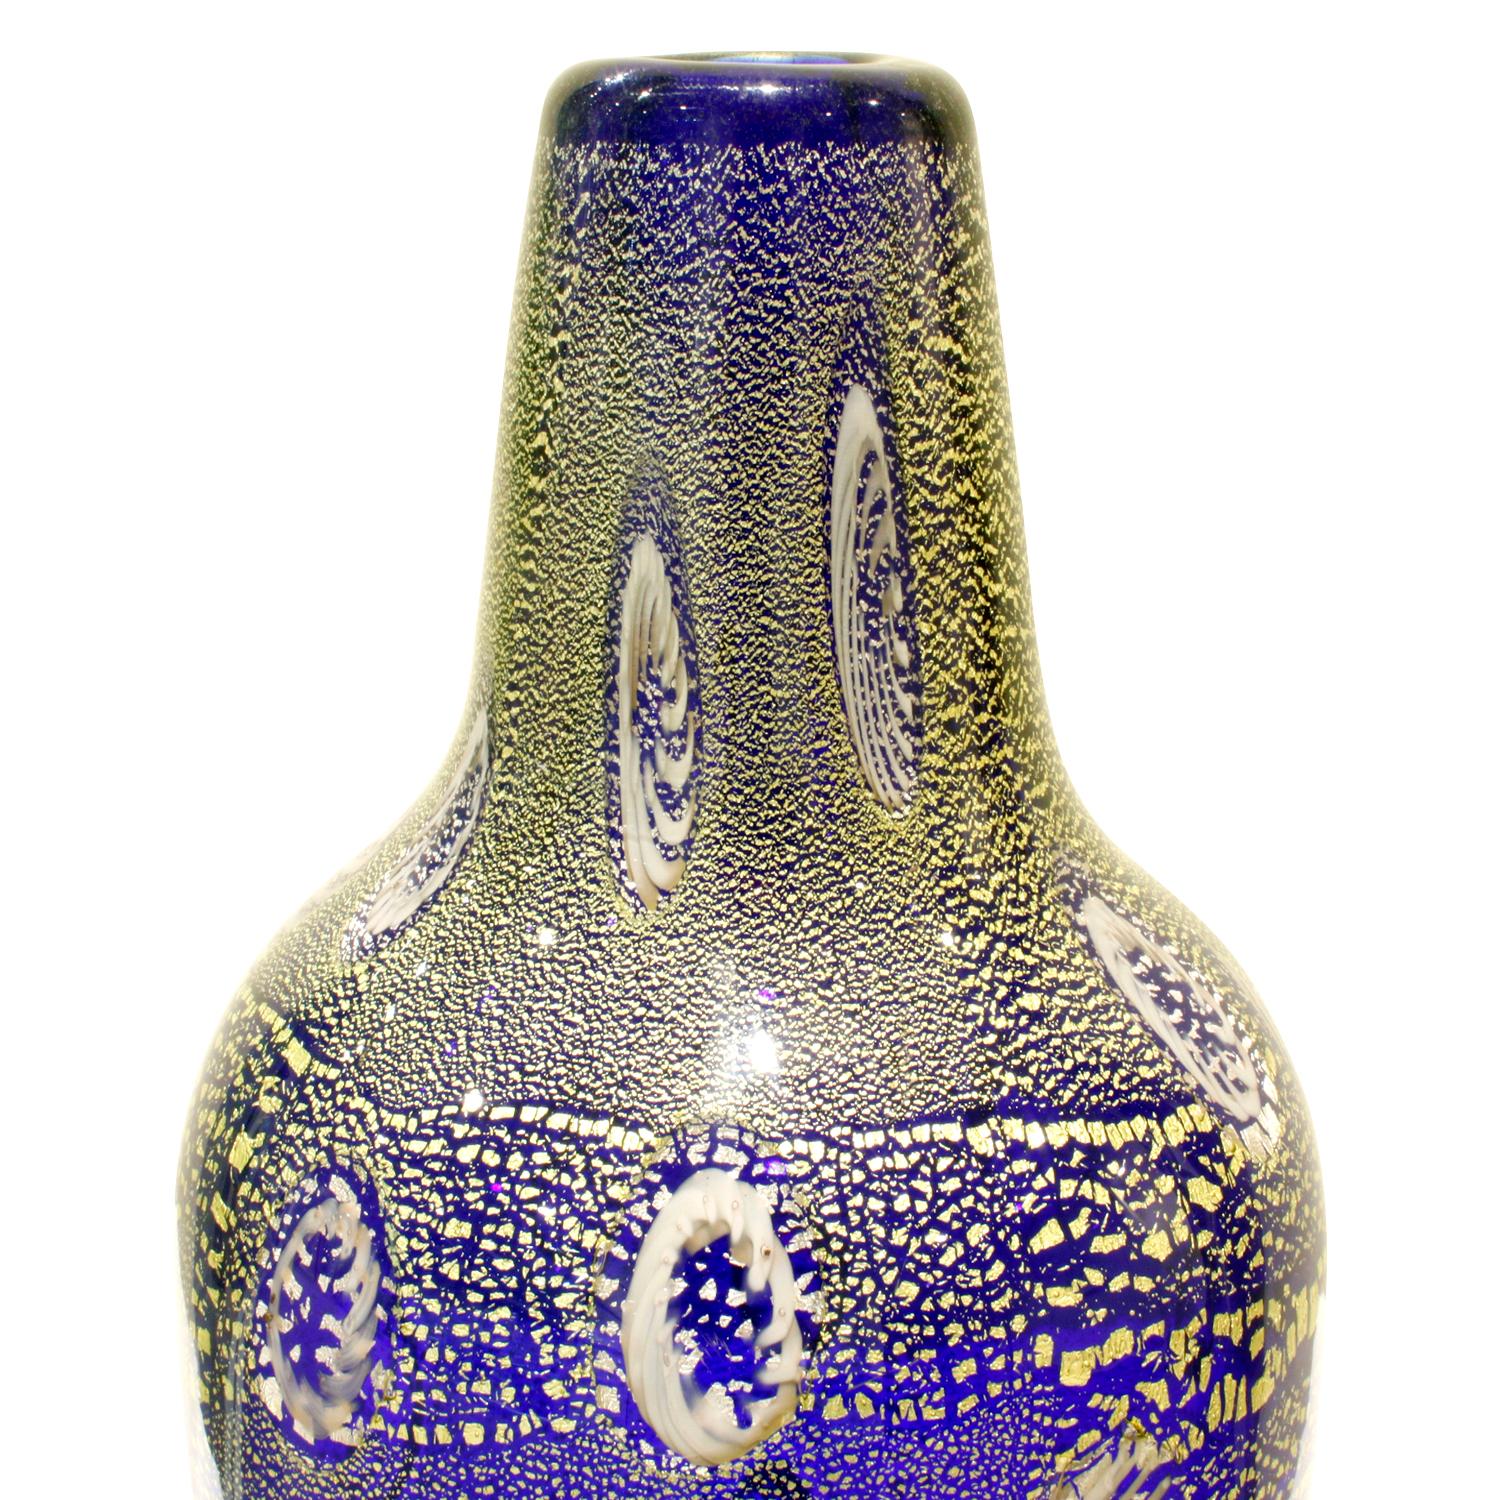 Hand blown blue glass vase with murrhines and gold foil by Giulio Radi for Arte Vetraria Muranese (A.V.E.M.), Murano, Italy, circa 1950. Radi's works are beautiful and rare. The gold foil in the glass give it a jewel-like quality.

Reference:
